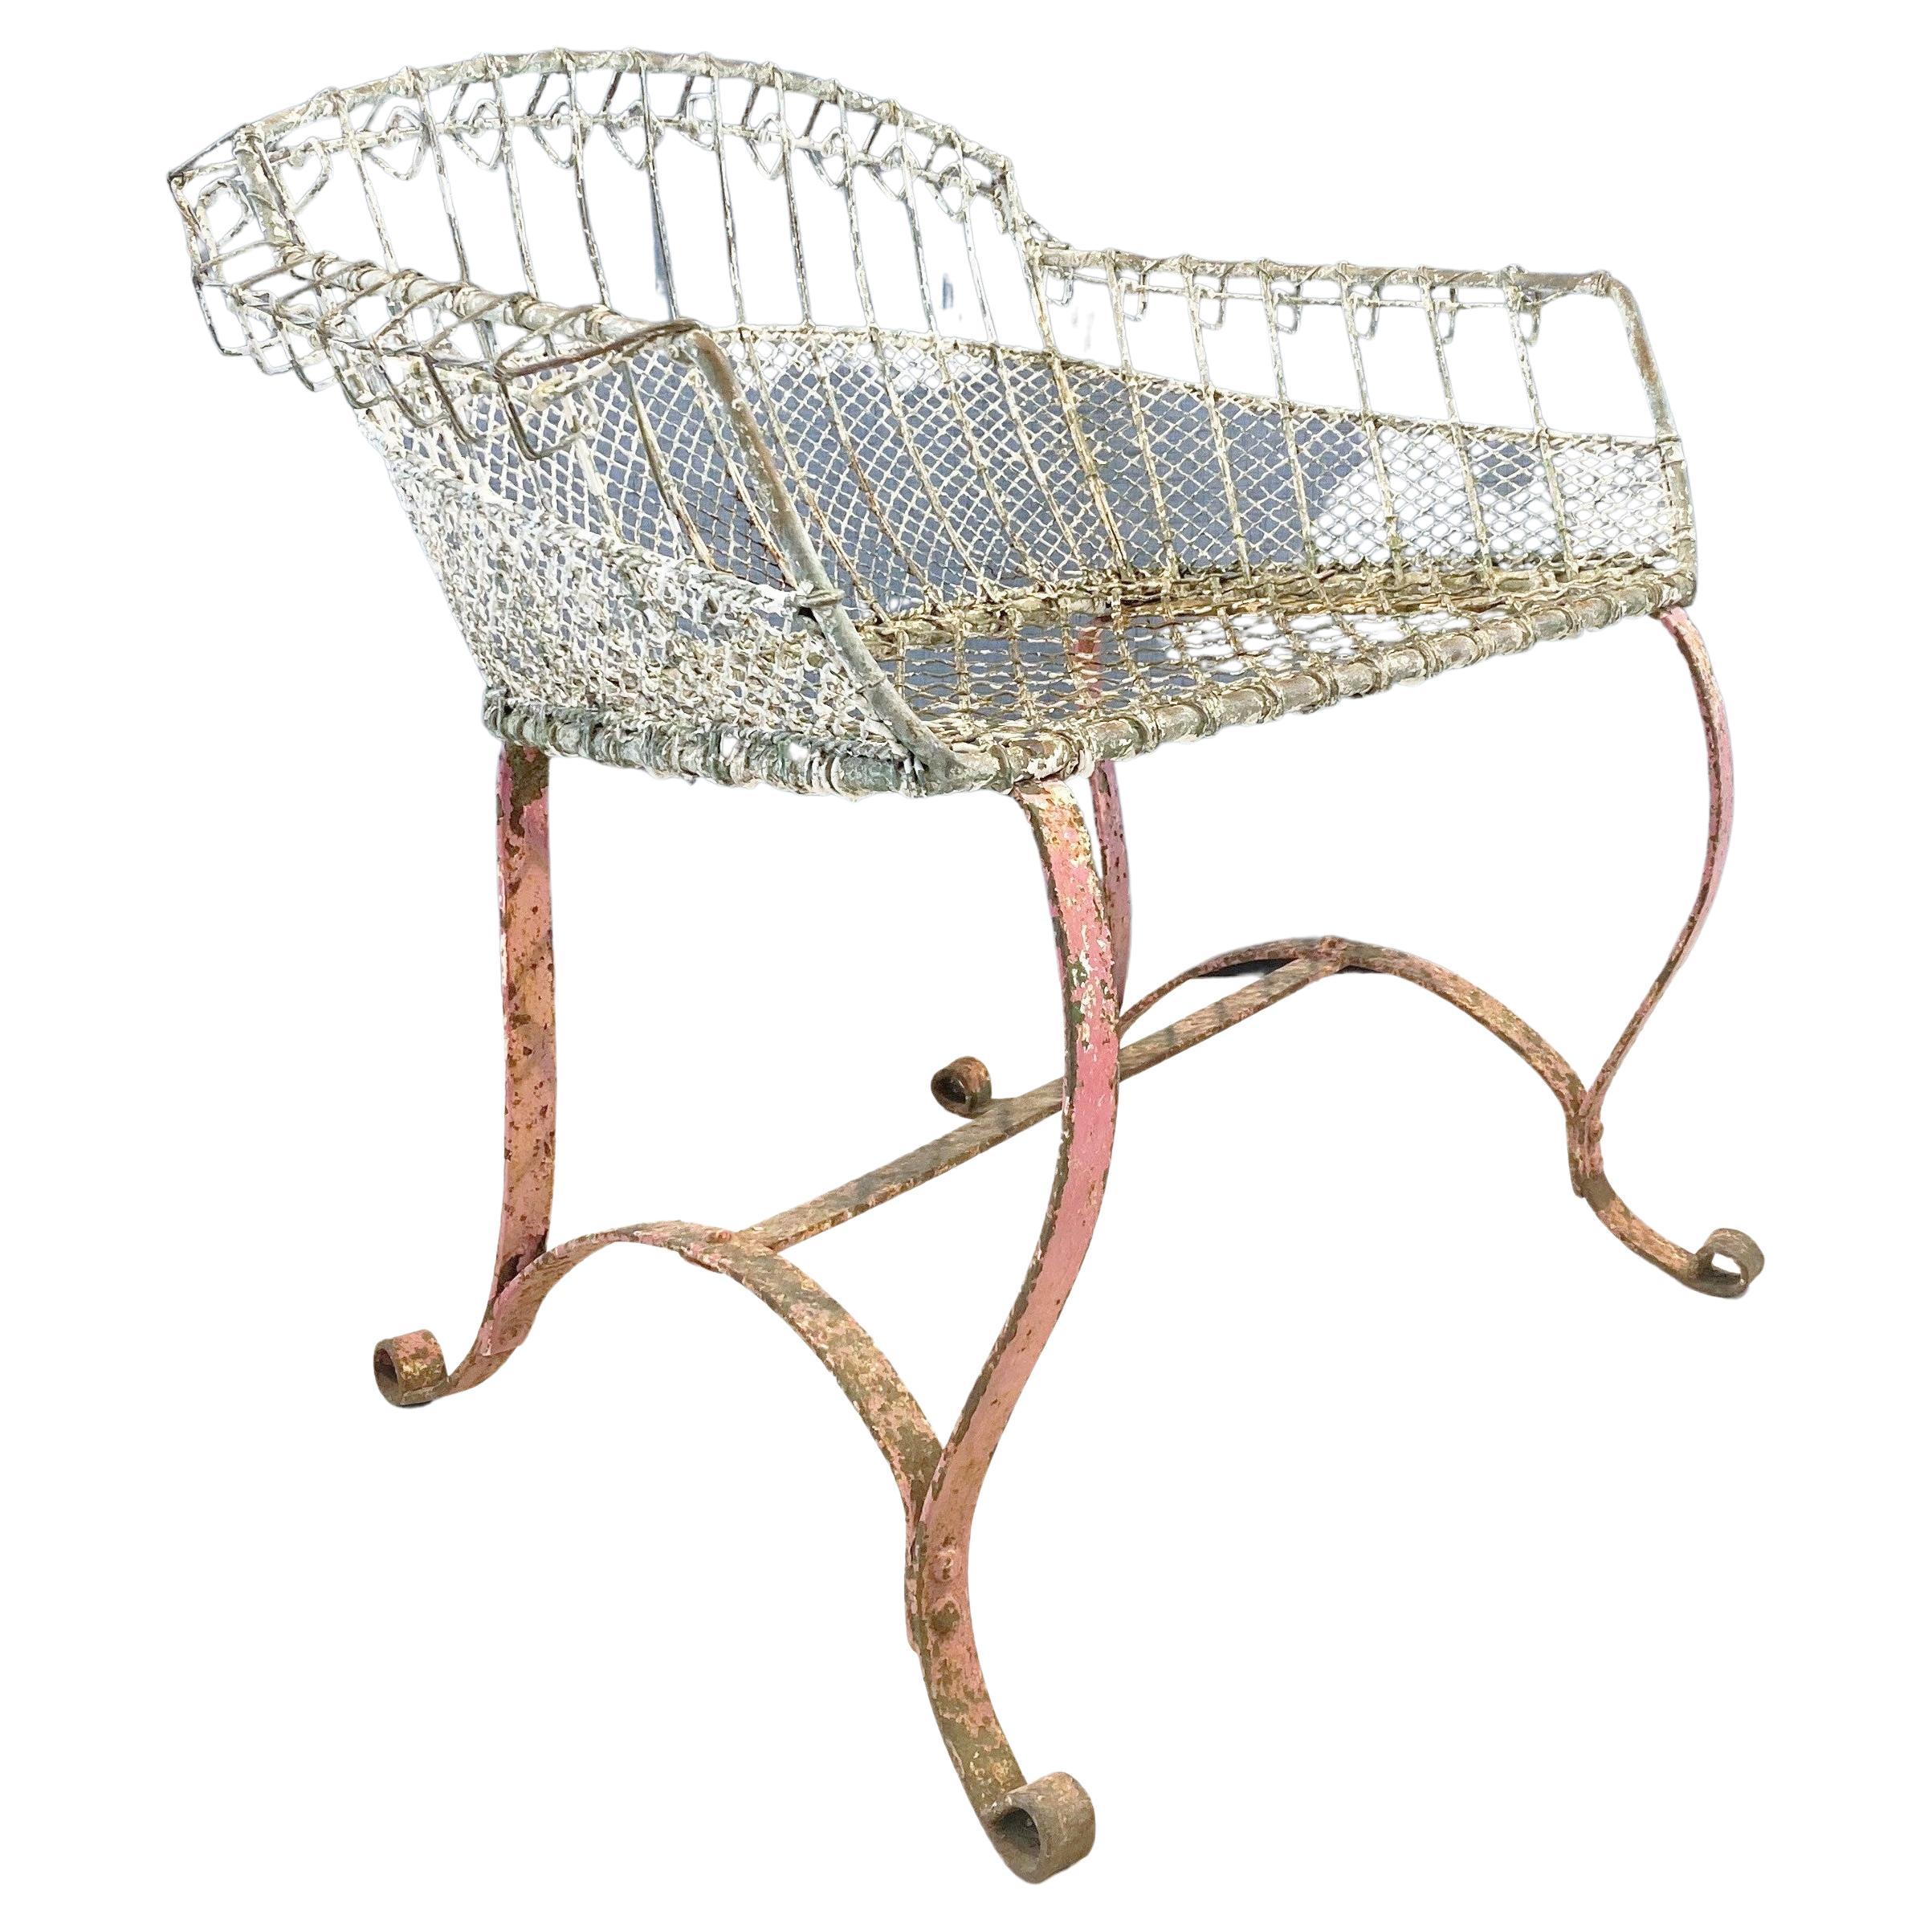 Rare 1920s Wirework Garden Seat with Scroll Wrought Iron Feet Aged Patina For Sale